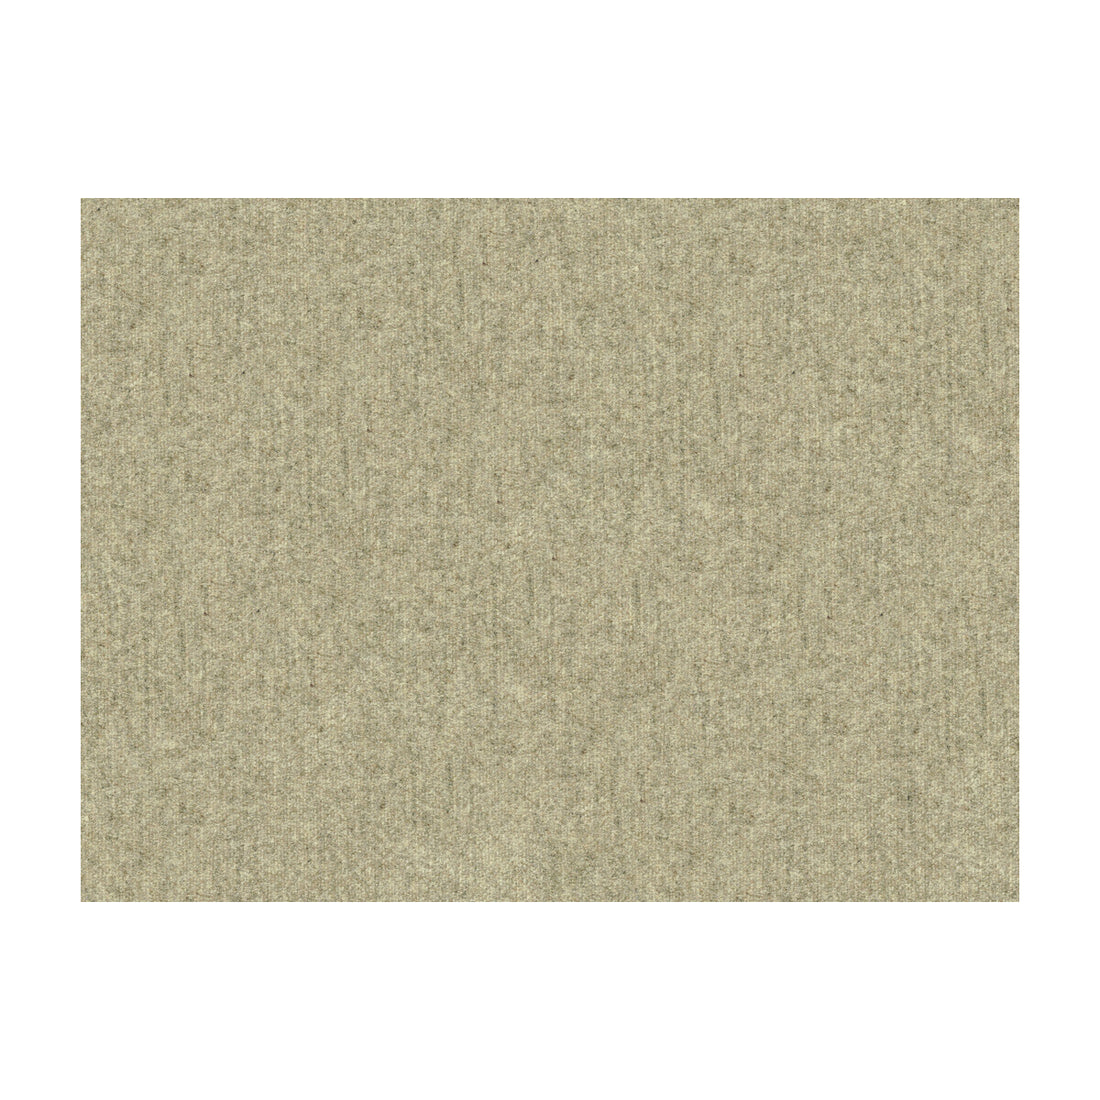 Chevalier Wool fabric in ash color - pattern 8013149.1611.0 - by Brunschwig &amp; Fils